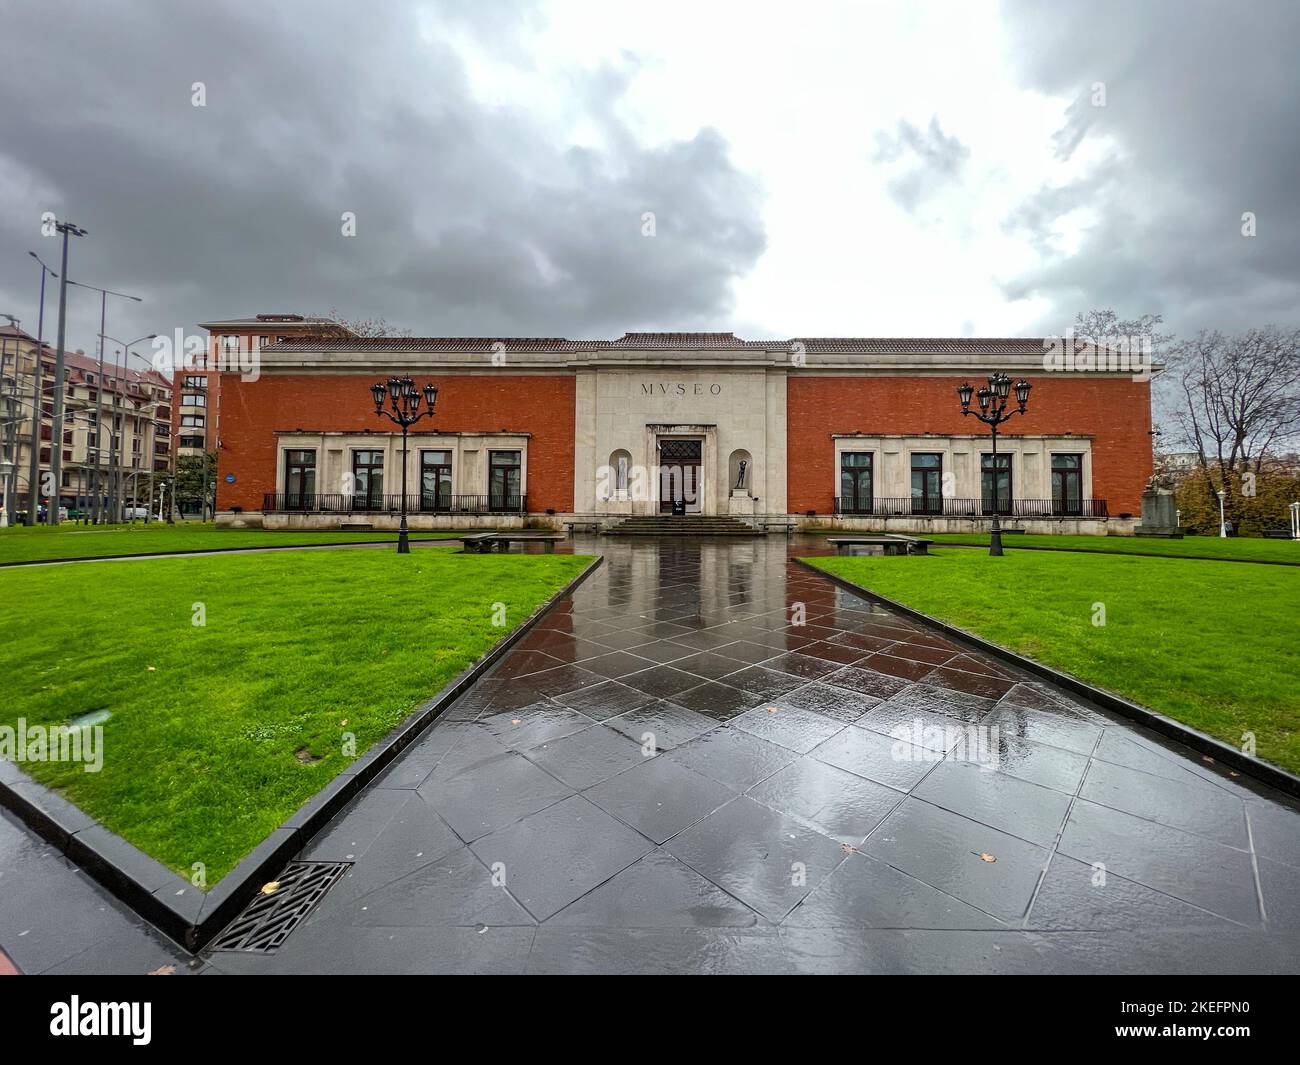 Bilbao, Spain - Nov 26, 2021: Bilbao Fine Arts Museum. The building of the museum is located entirely inside the city's Doña Casilda Iturrizar park. Stock Photo